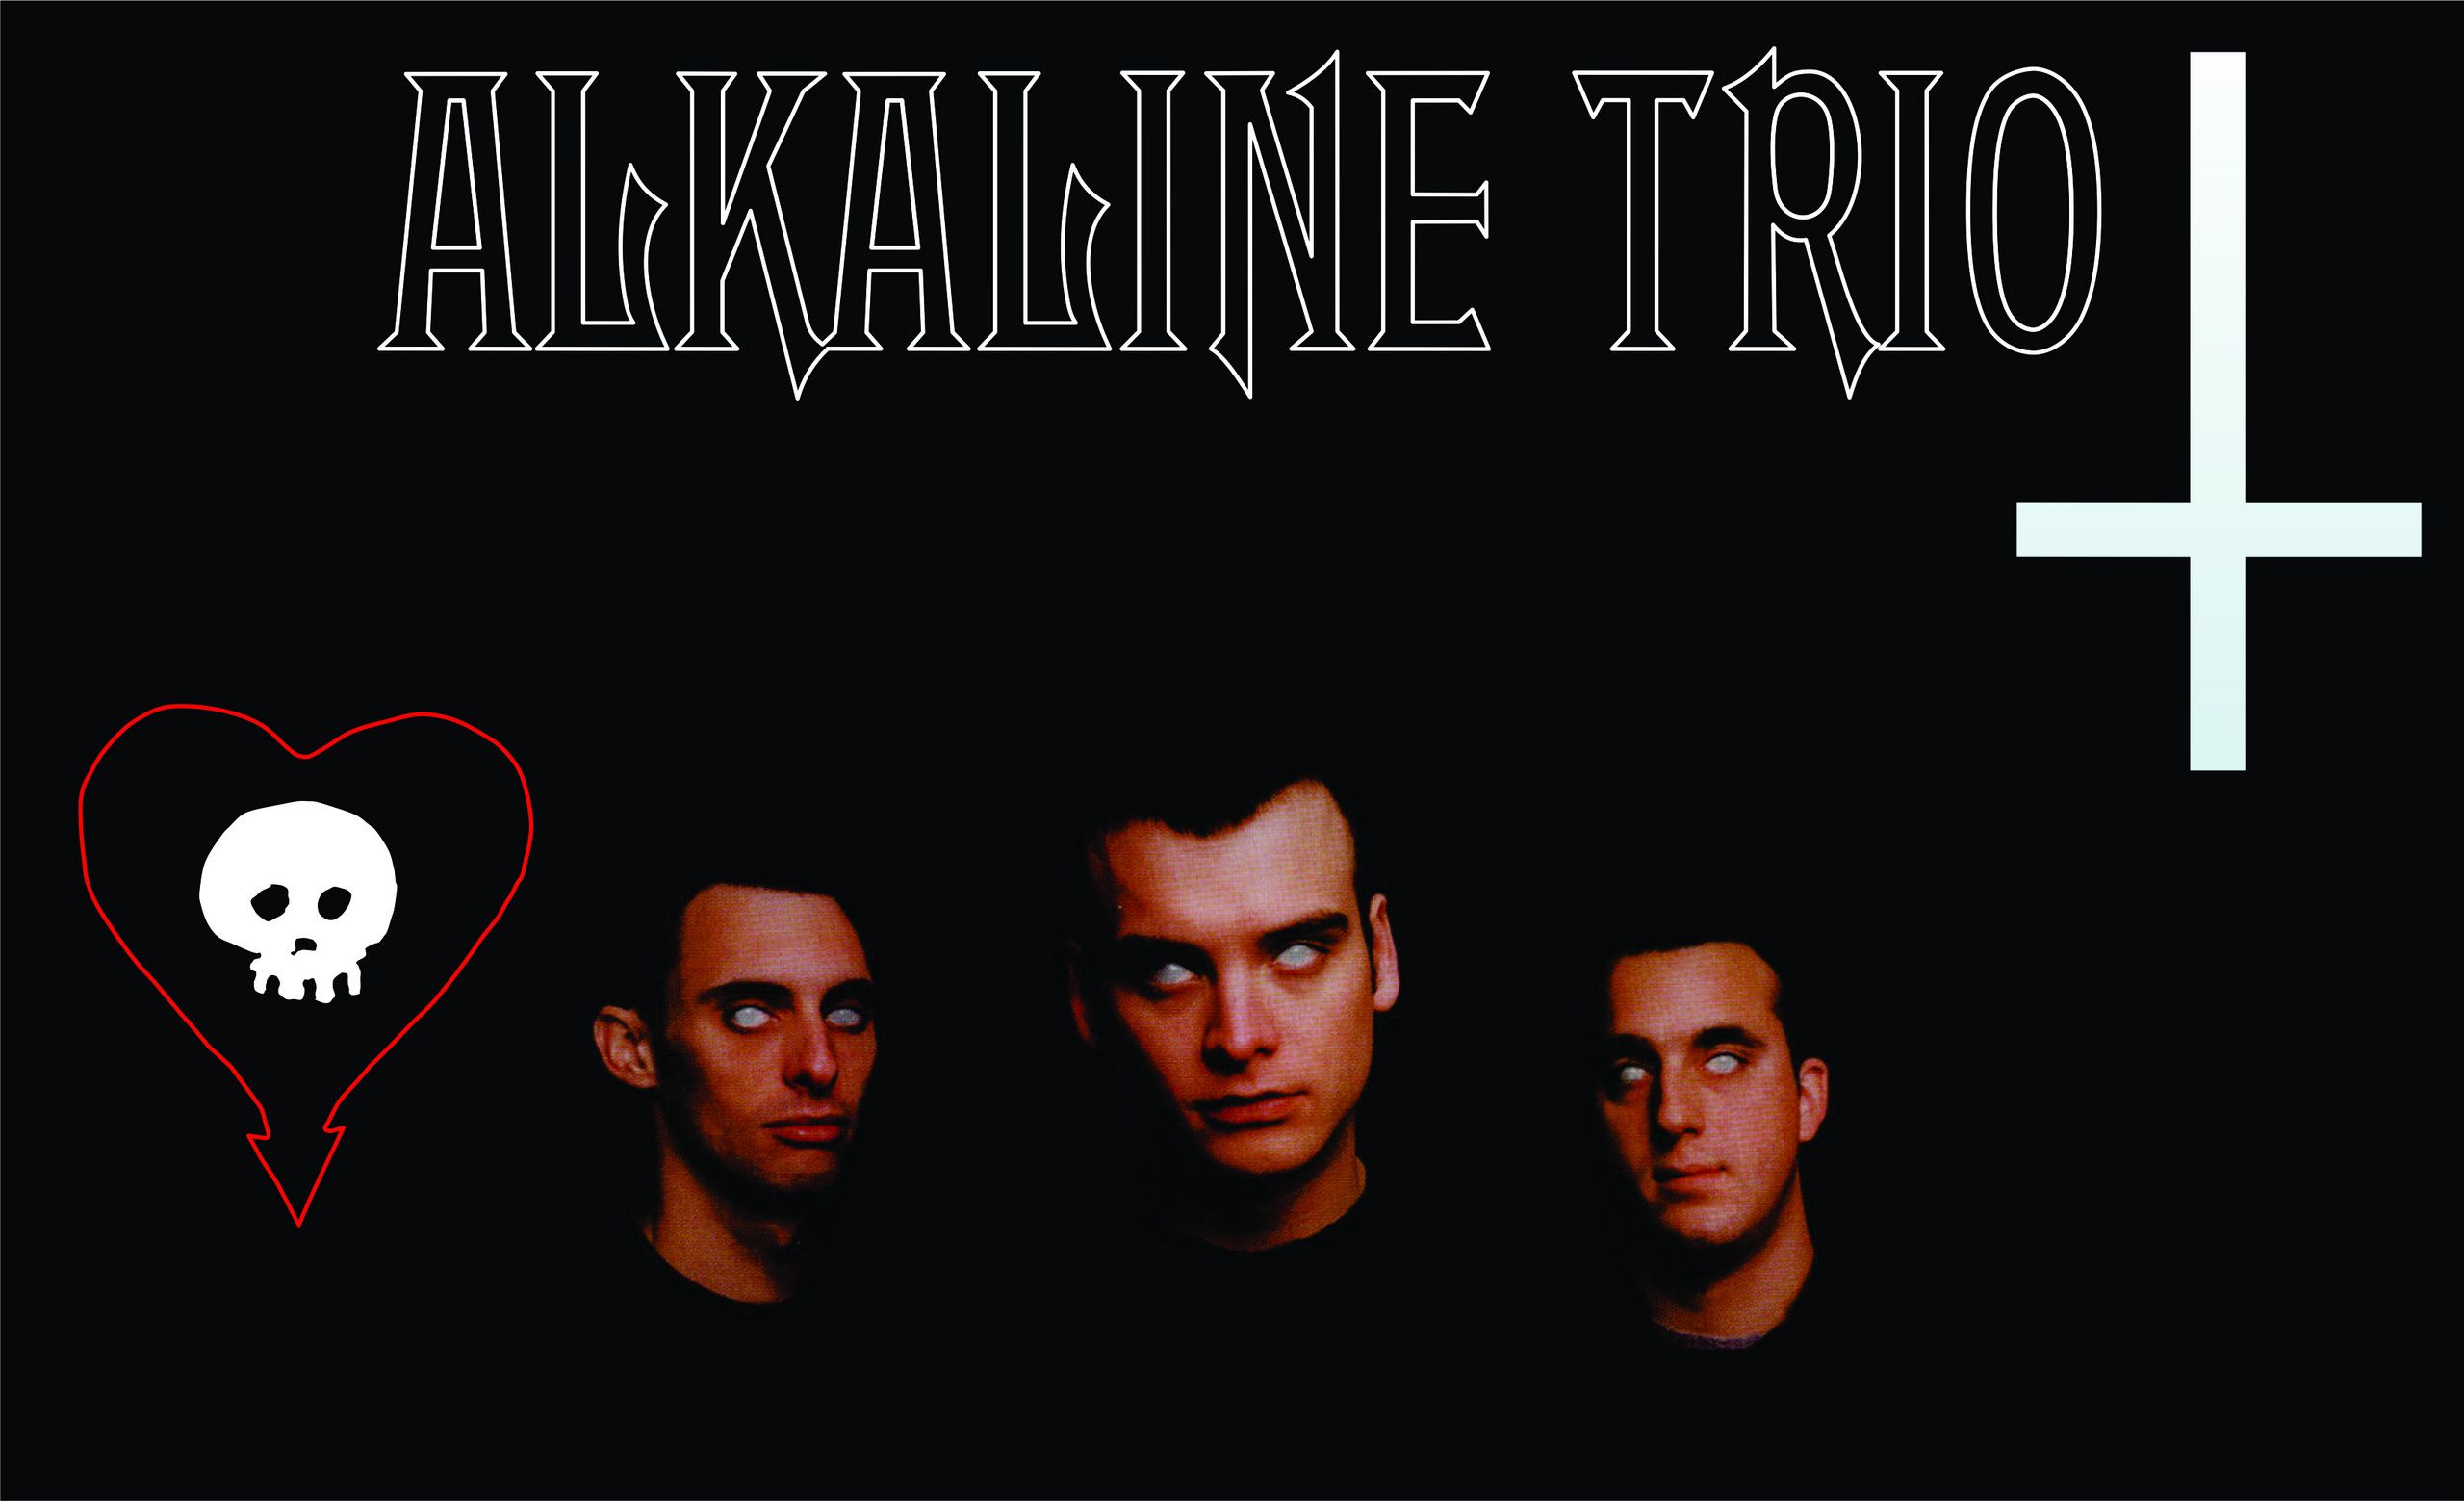 Alkaline Trio From Here To Infirmary Photo